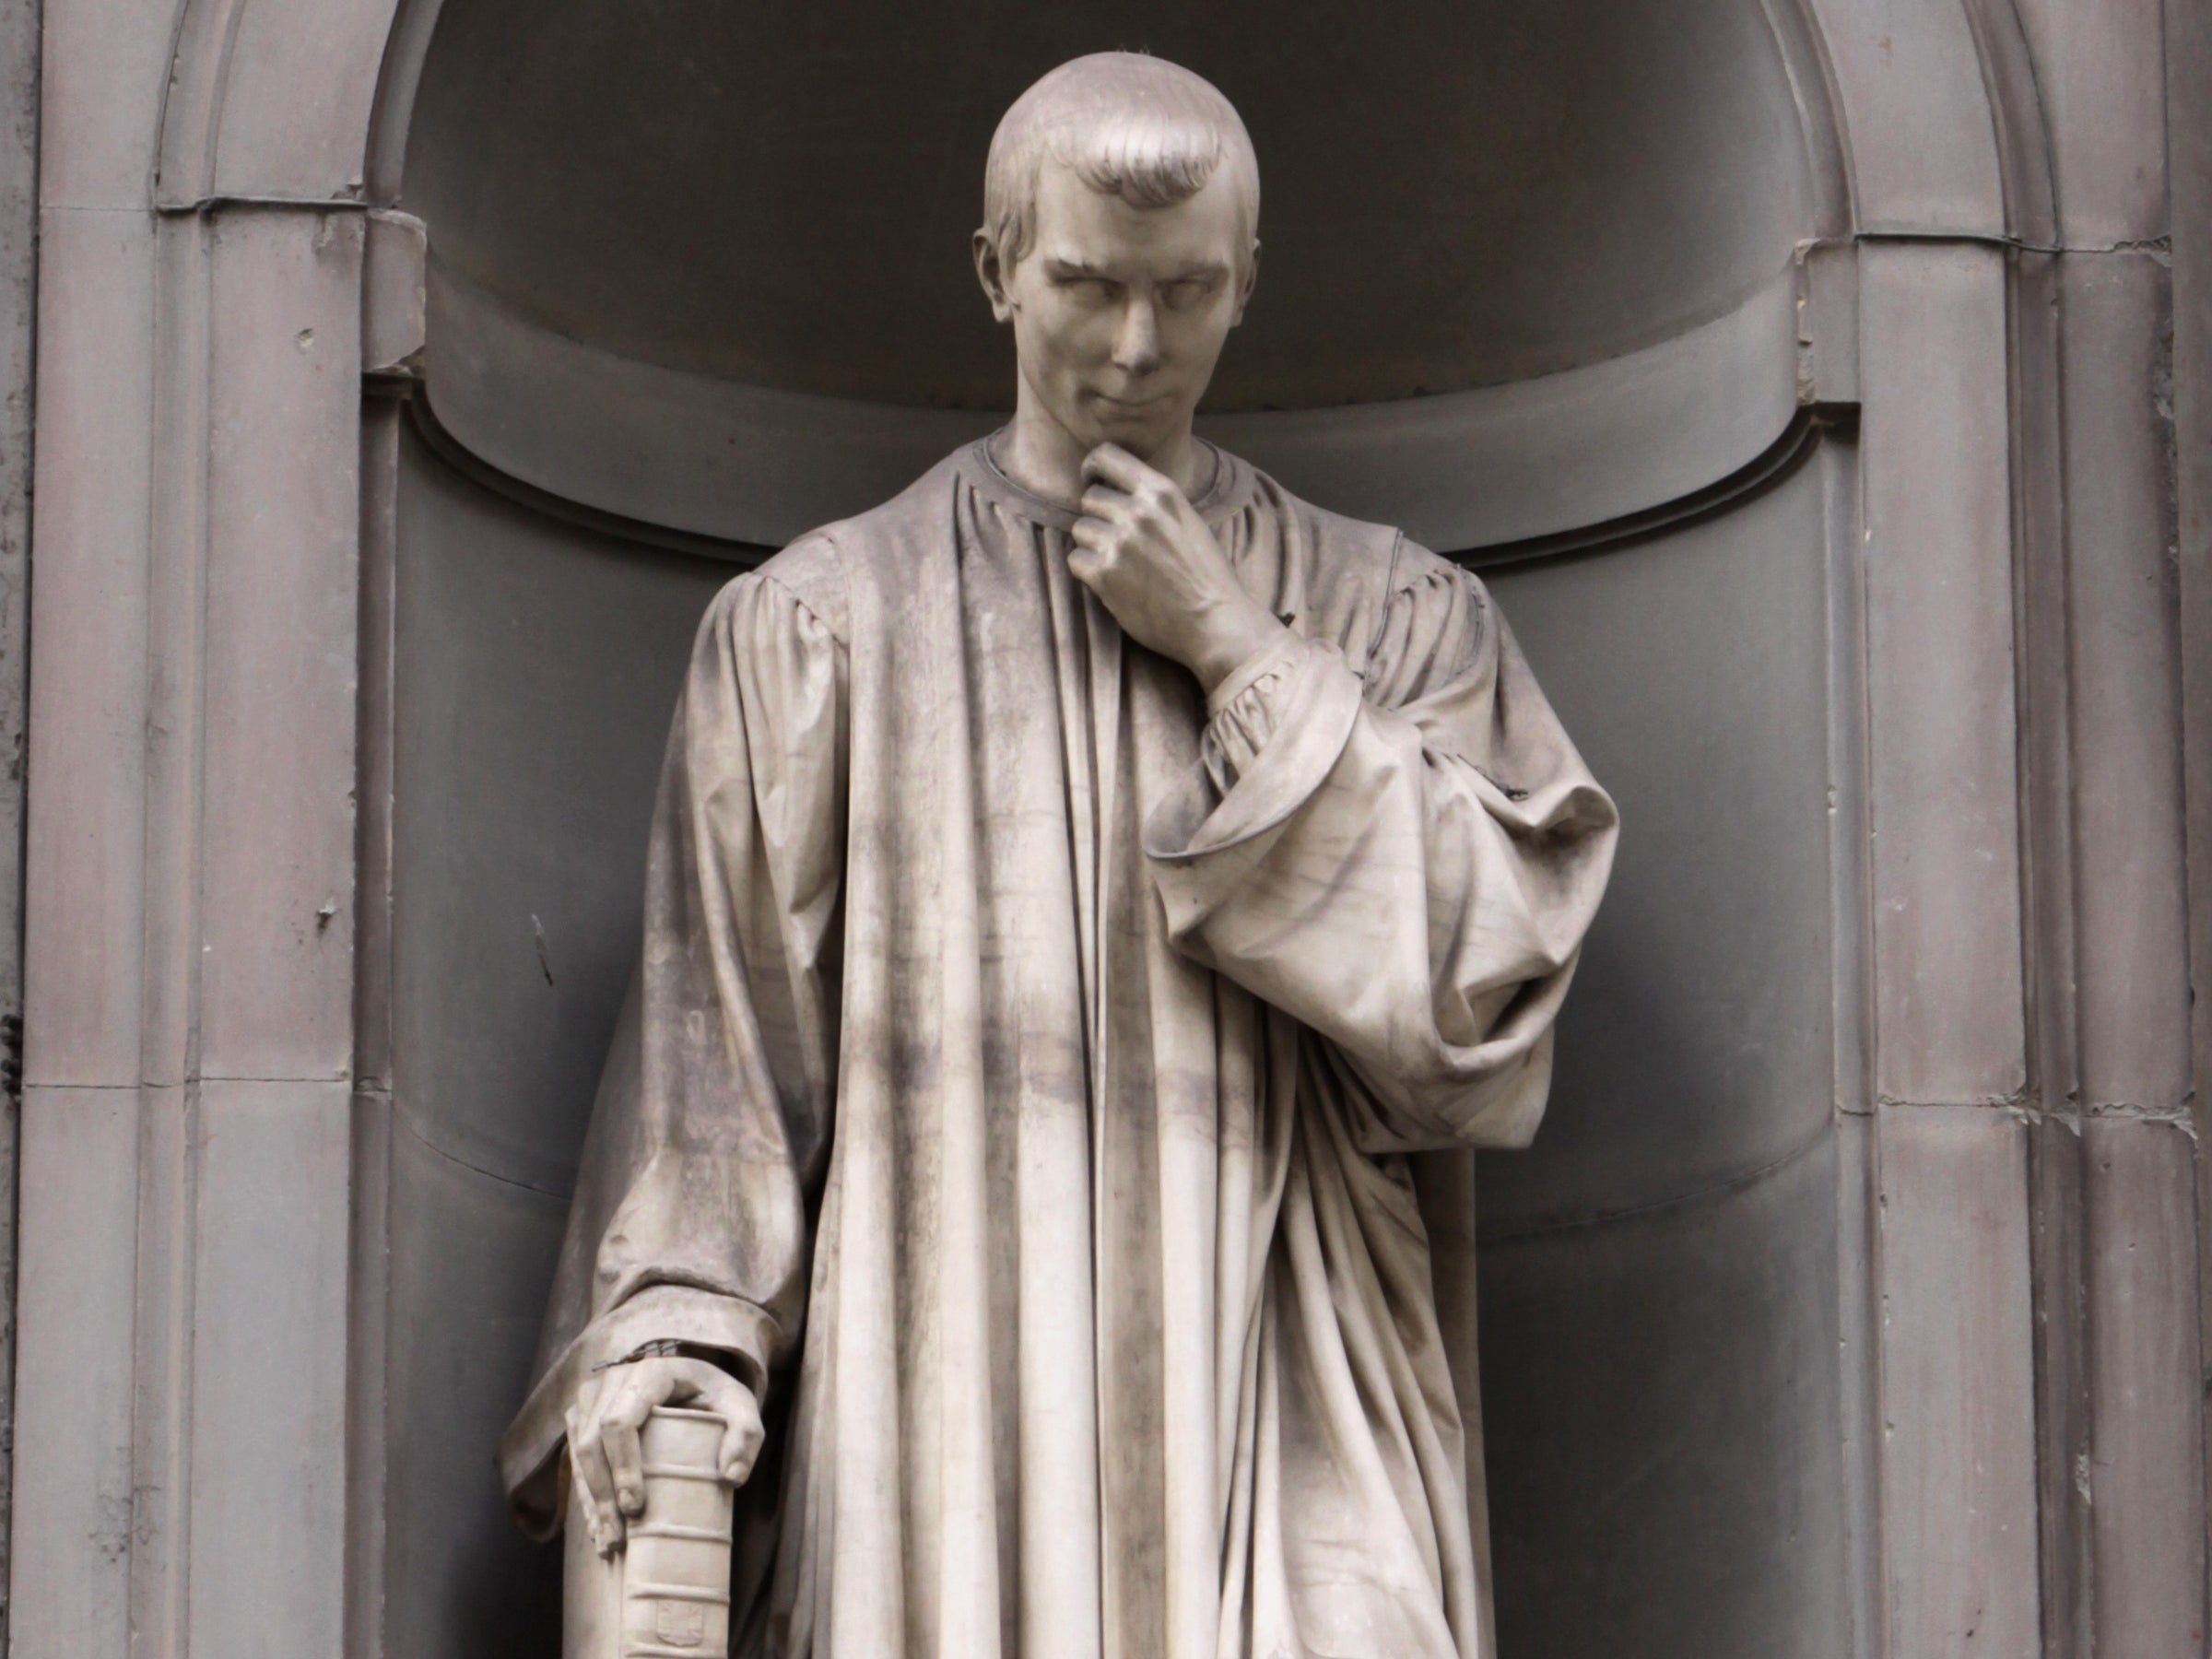 Machiavelli’s early work as a diplomat was essential to his thought